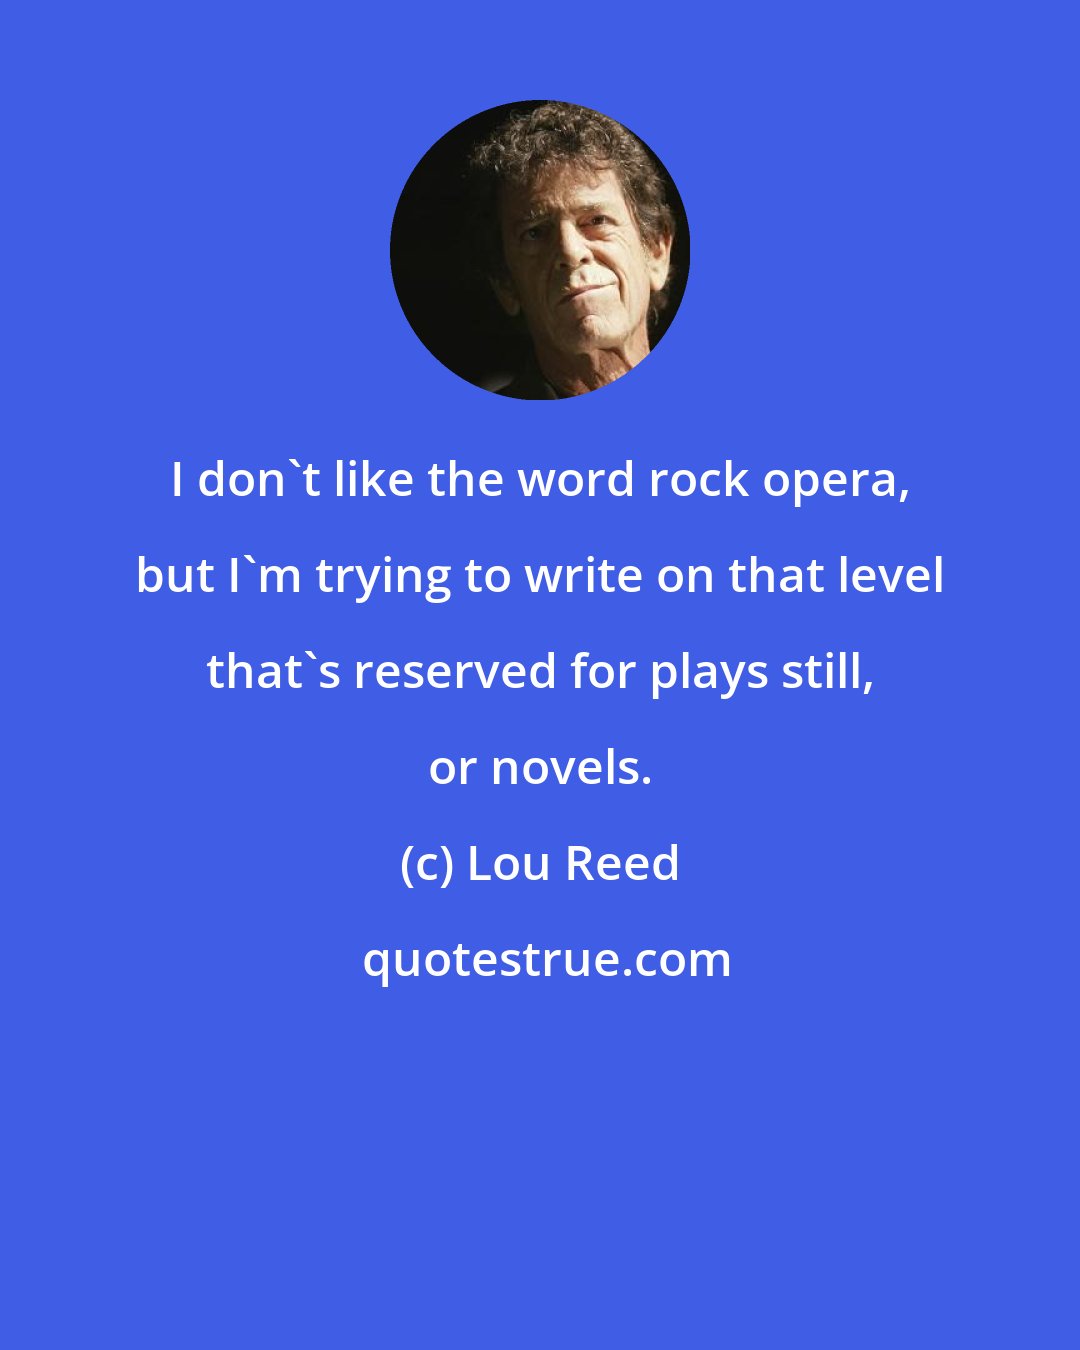 Lou Reed: I don't like the word rock opera, but I'm trying to write on that level that's reserved for plays still, or novels.